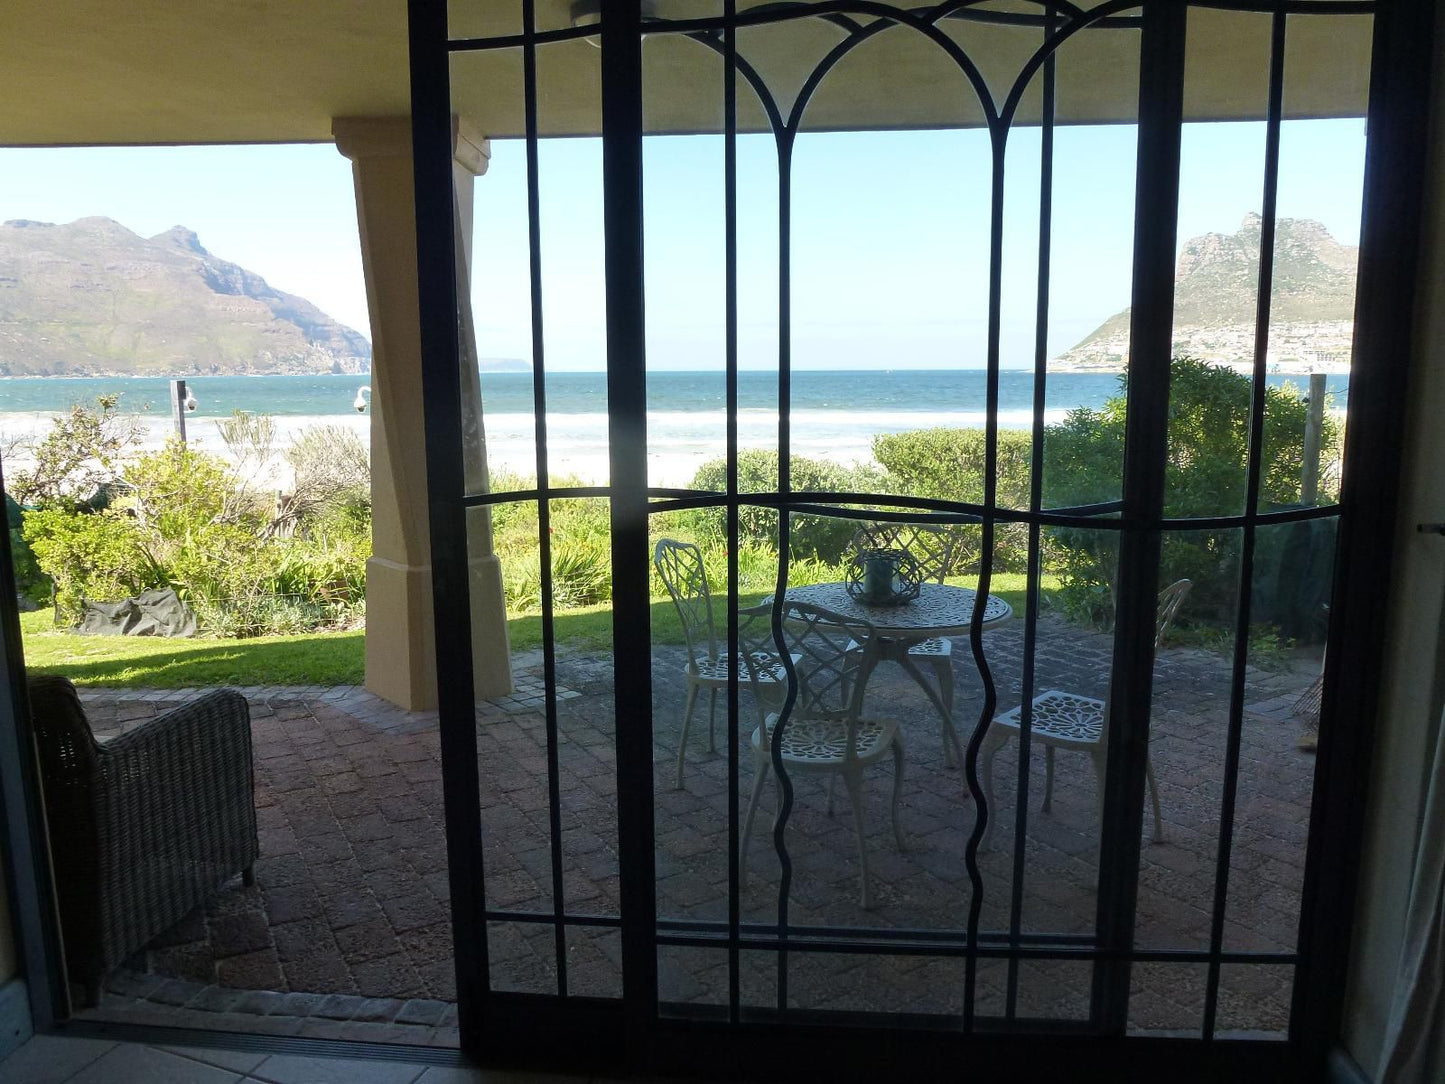 Village Self Catering Apartments Scott Estate Cape Town Western Cape South Africa Beach, Nature, Sand, Framing